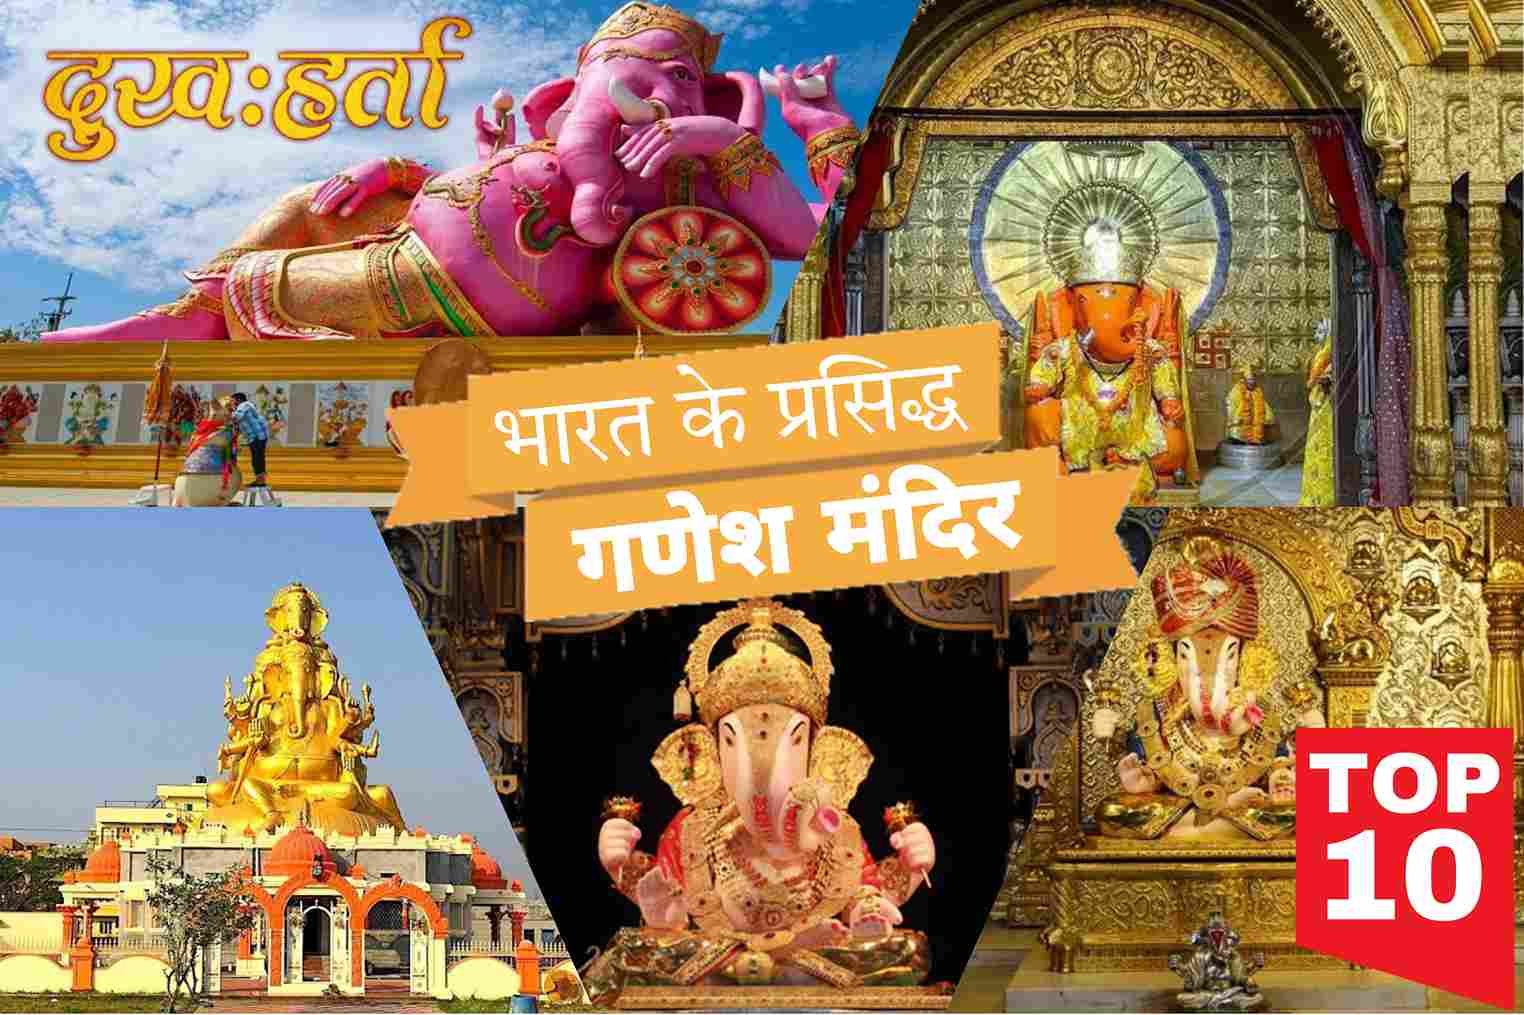 Most Famous Ancient Ganapati Temples in India, Top 10 Famous Ancient Lord Ganesha Temples In India, Top 10 Most Famous Temples of Lord Ganesha in India, 10 Most Popular Ganesh Temples in India, Top 7 Famous Ganesha Temples In India, Famous Ganesh temples of India in Hindi, Top 10 Most Famous Temples of Lord Ganesha in India